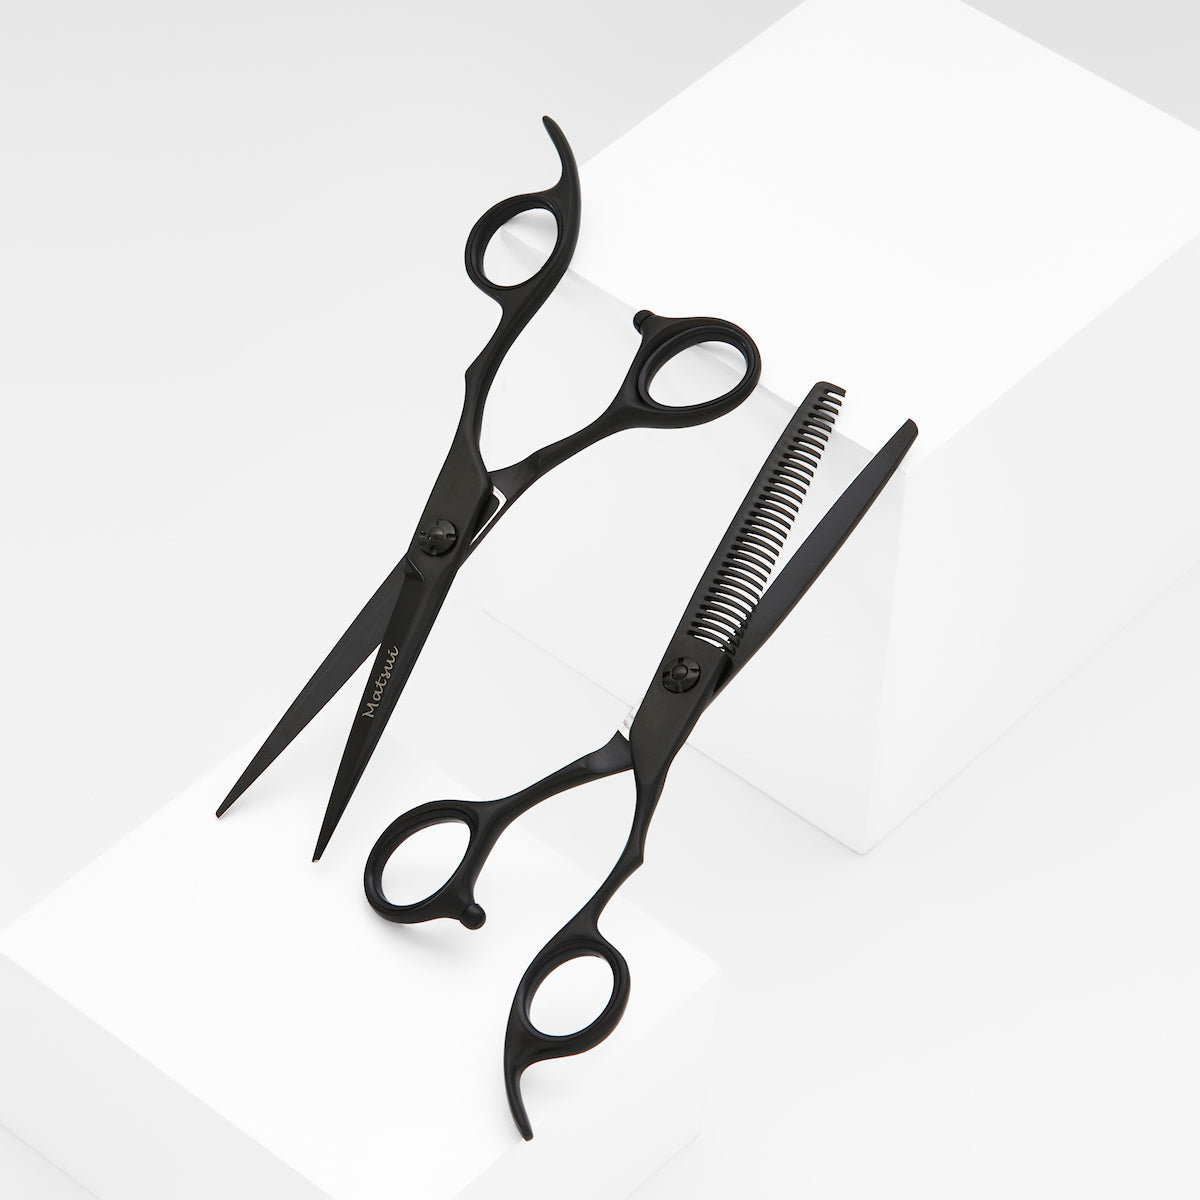 Deluxue Matsui Matte Black Aichei Mountain Offset Professional hair shears and Thinner Combination (6746372866114)